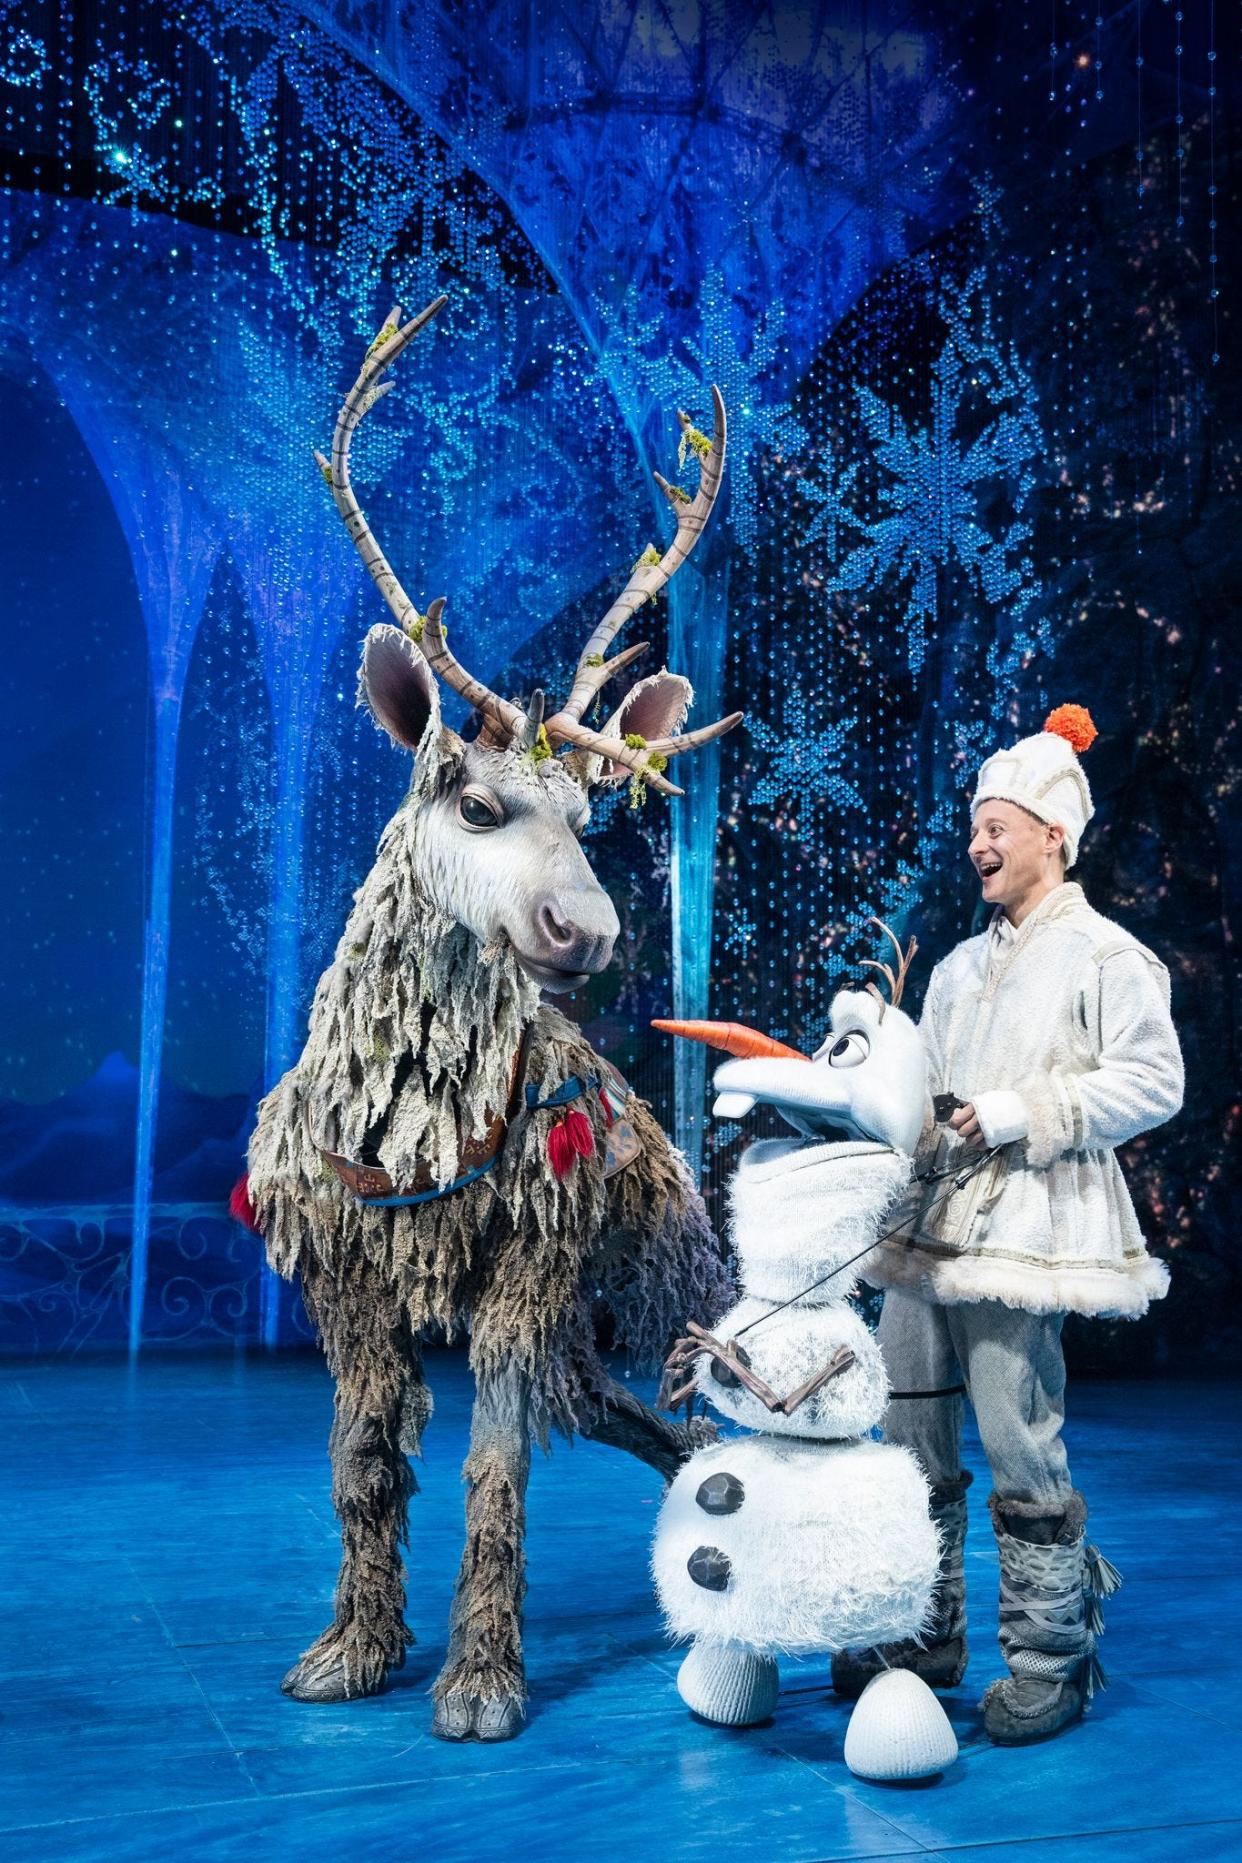 Not since Rudolph met Yukon Cornelius has a linkup been so tundra-riffic: Sven the reindeer meets Olaf the snowman in "Frozen."